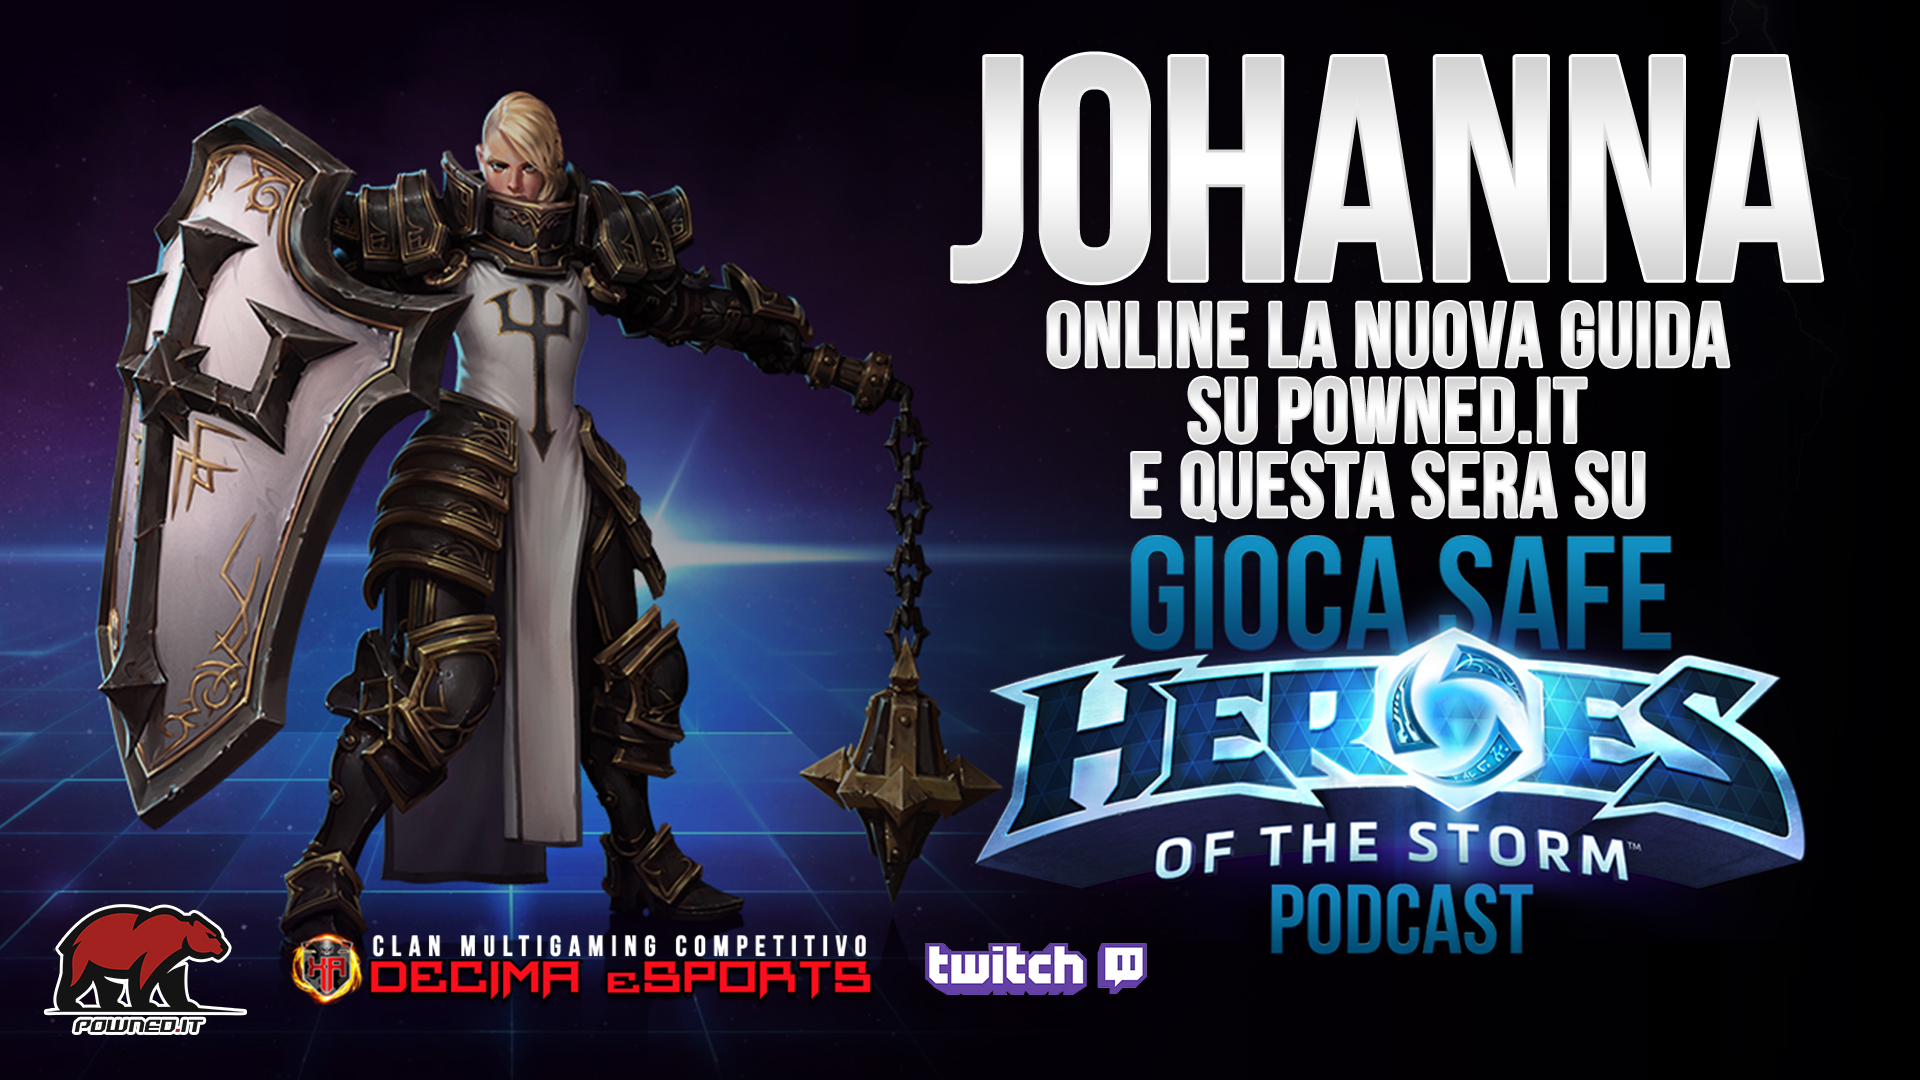 Gioca Safe! Heroes of the Storm Podcast